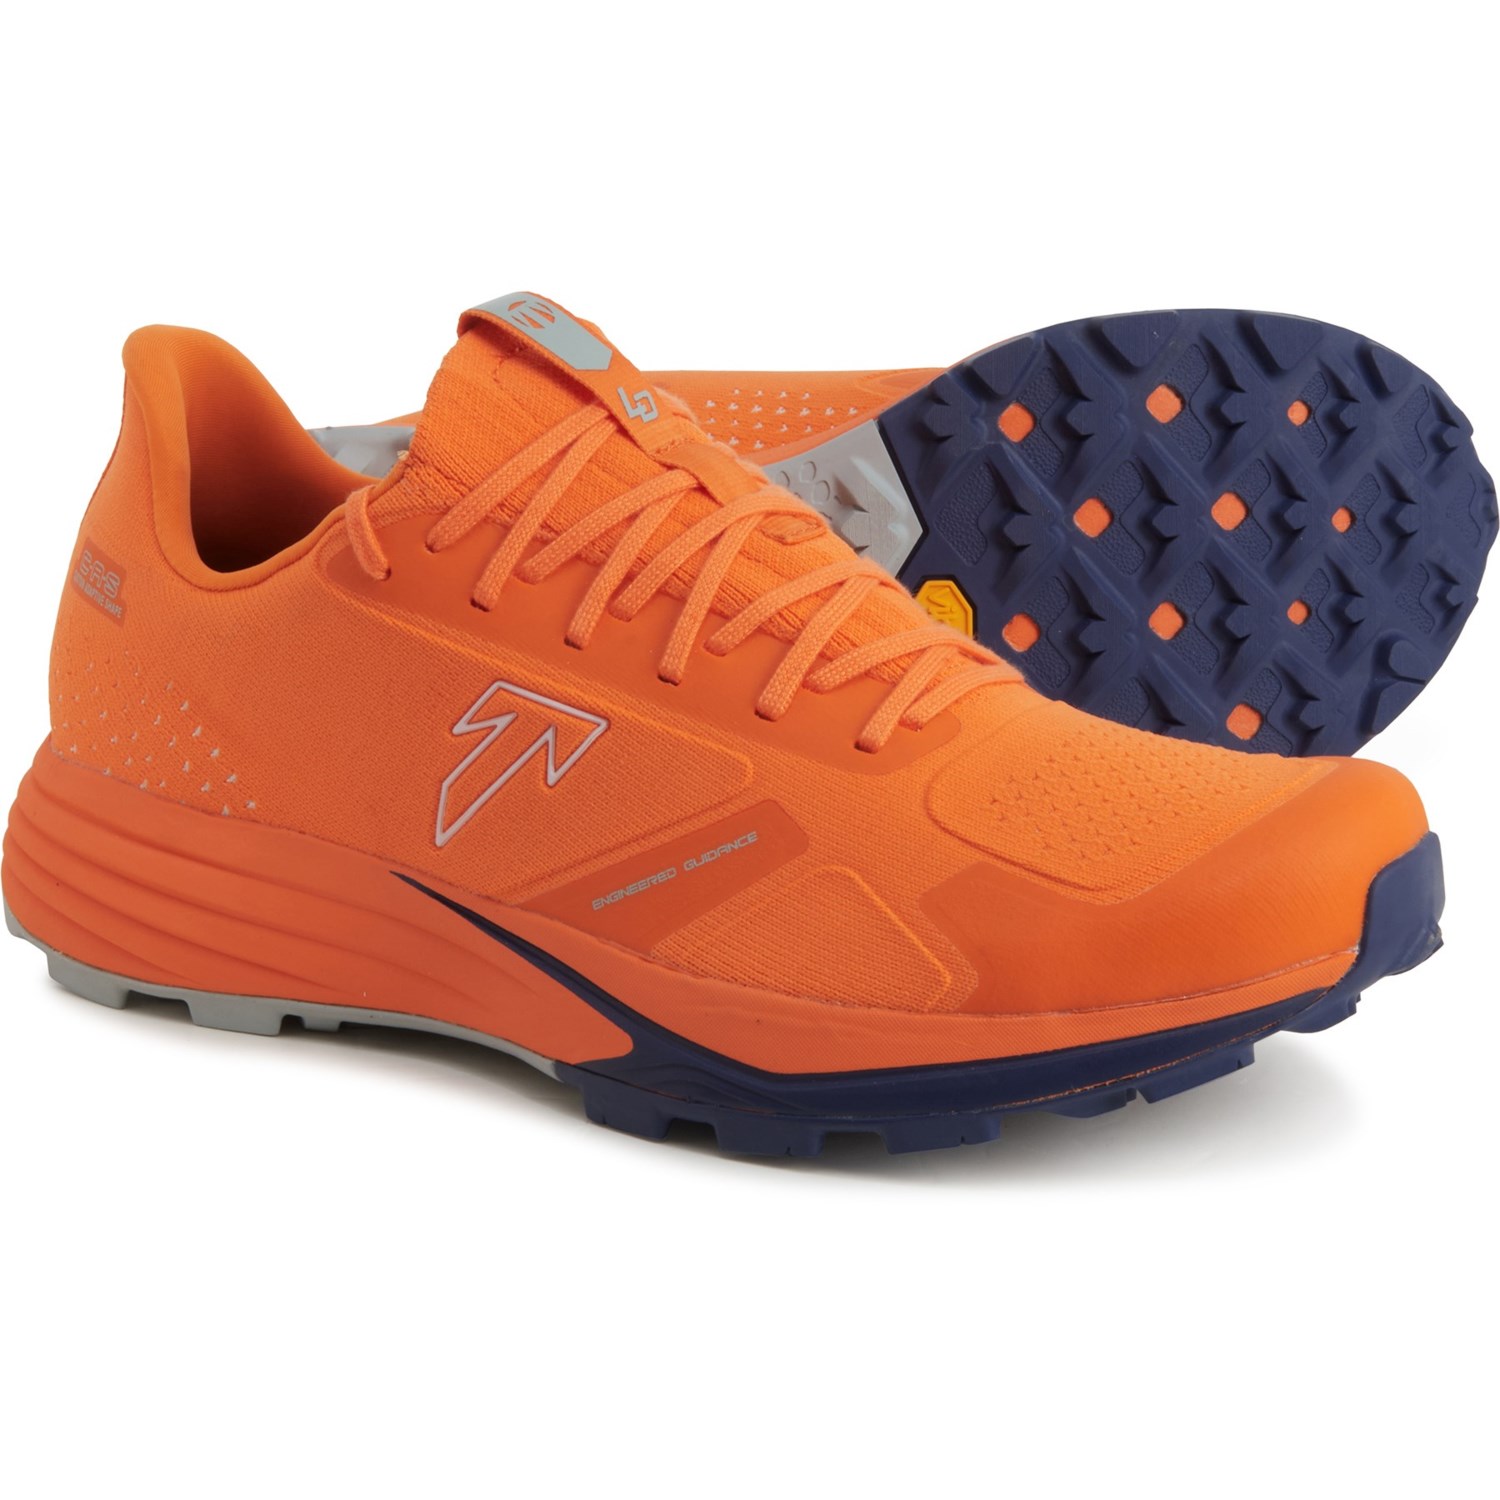 Tecnica Origin LD Trail Running Shoes (For Men) - Save 42%